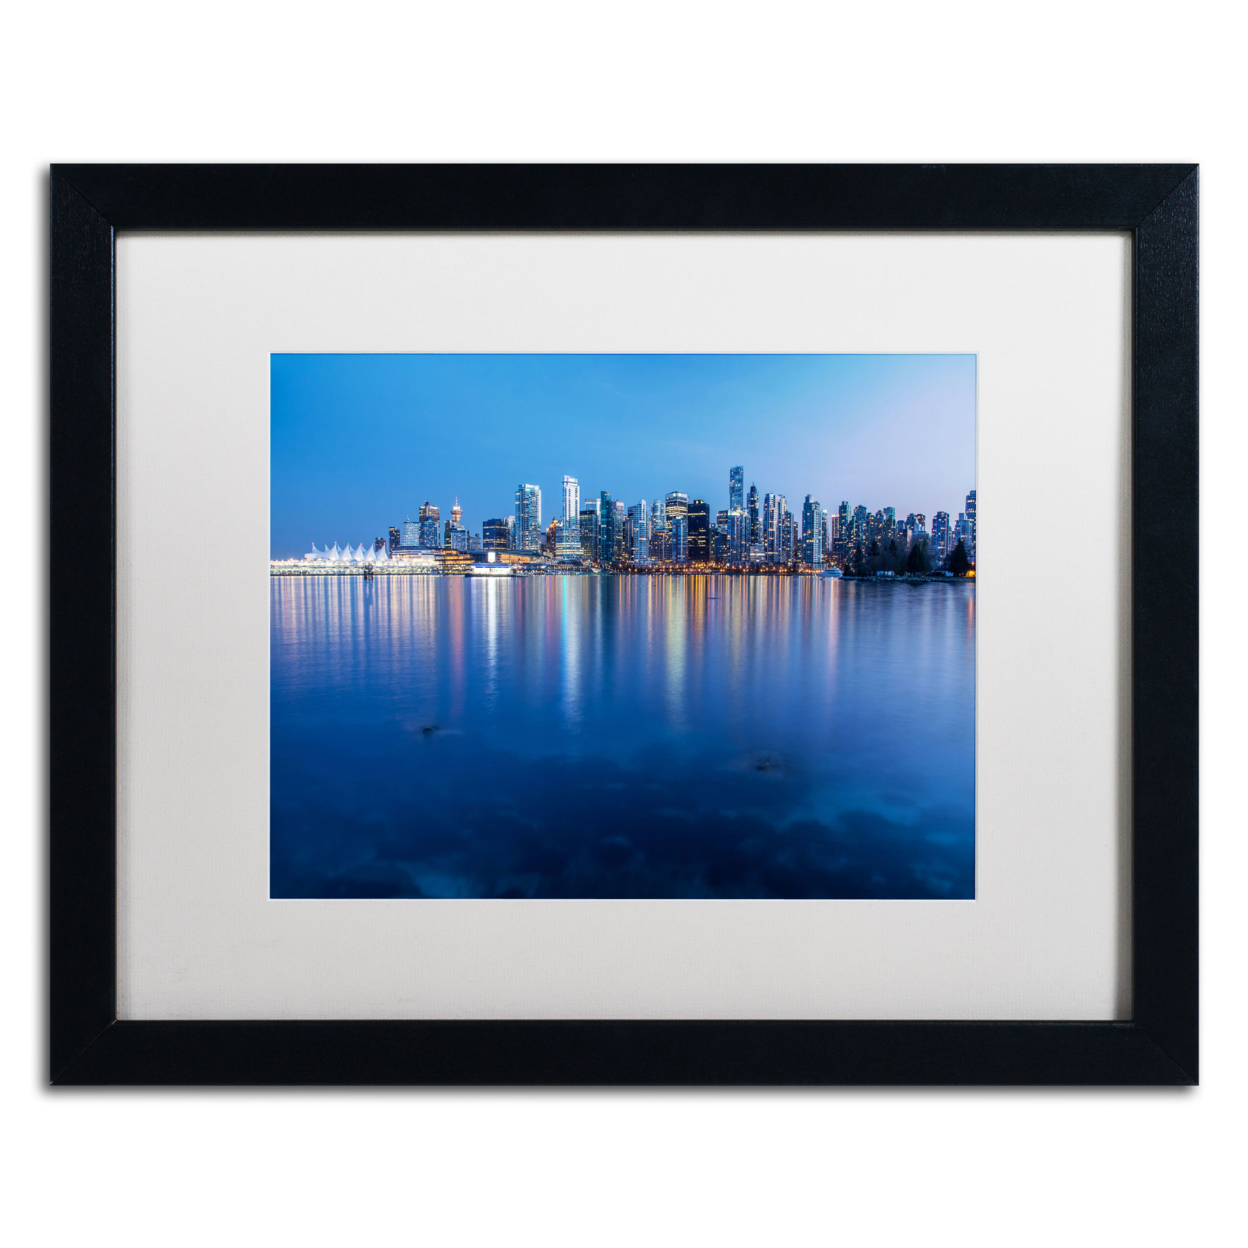 Pierre Leclerc 'Vancouver City Reflection' Black Wooden Framed Art 18 X 22 Inches